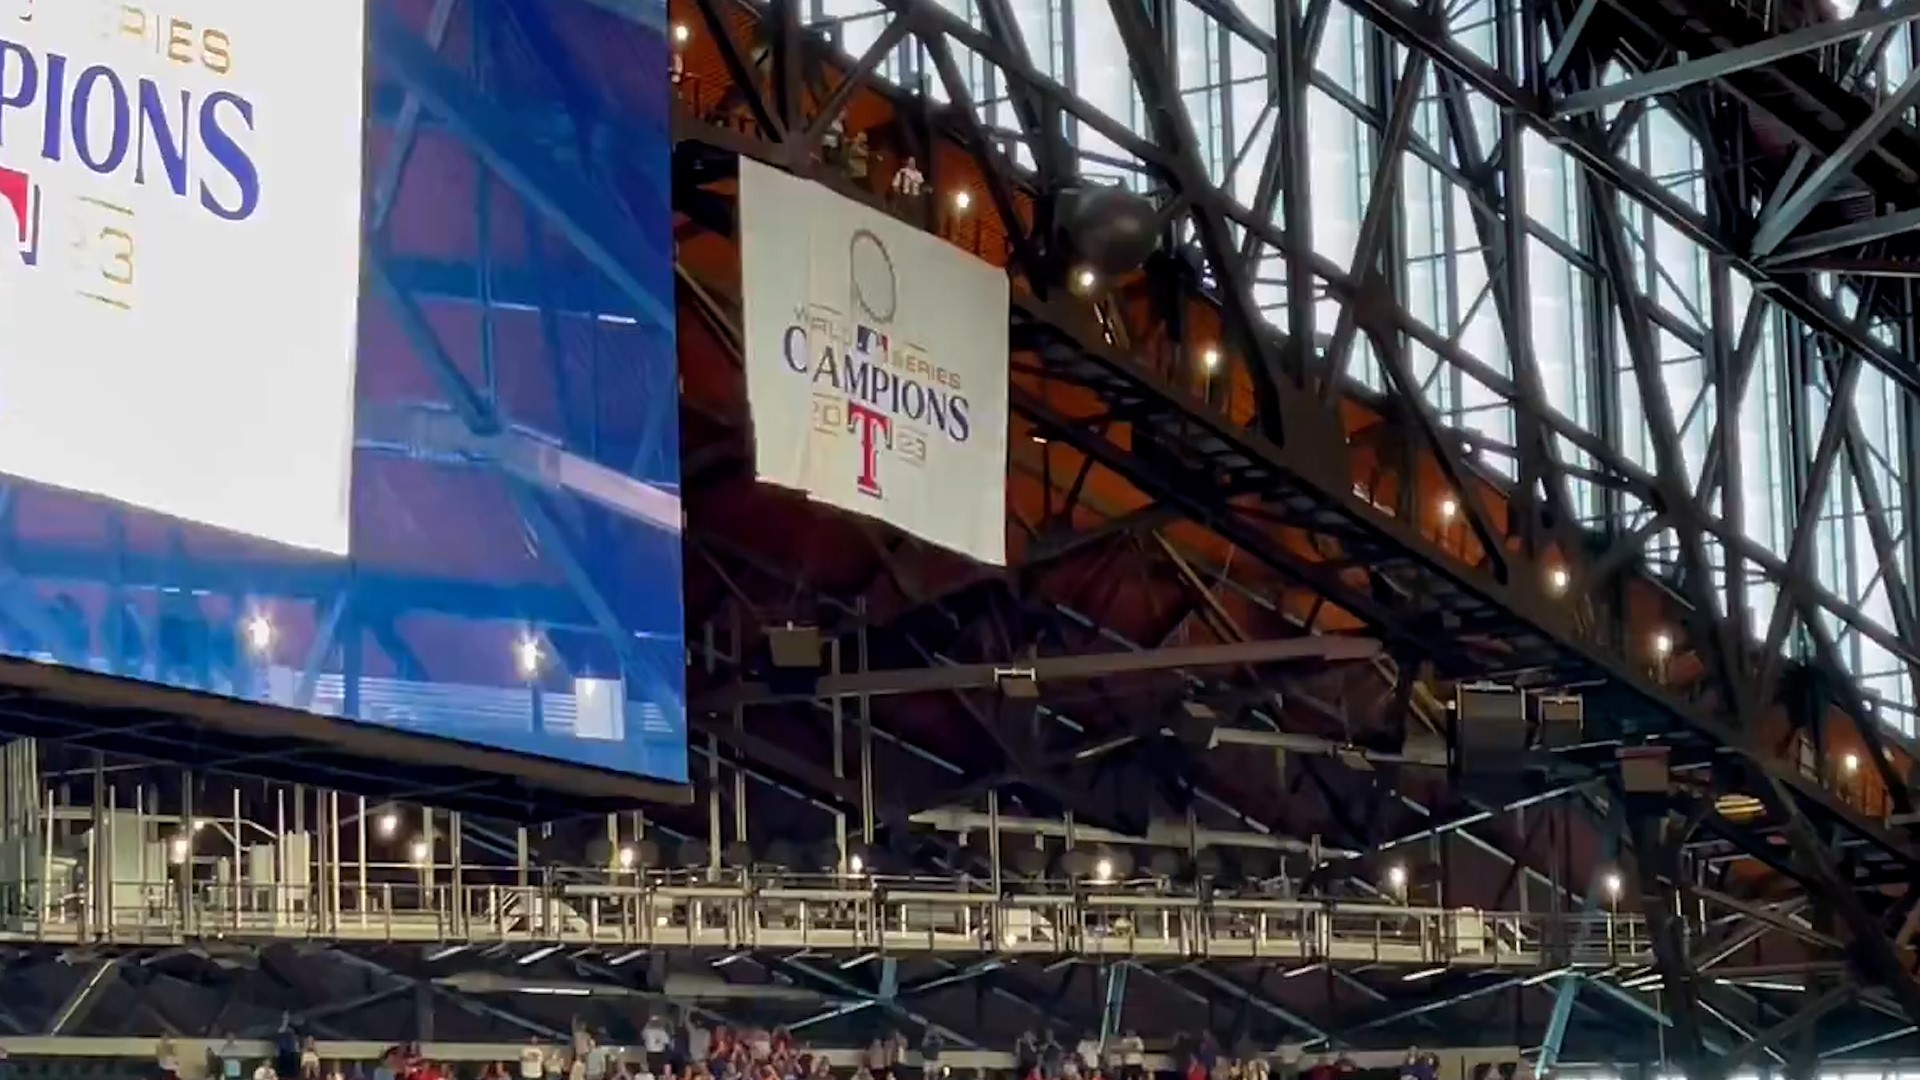 The Texas Rangers unveiled their World Series championship banner at Globe Life Field on Opening Day.